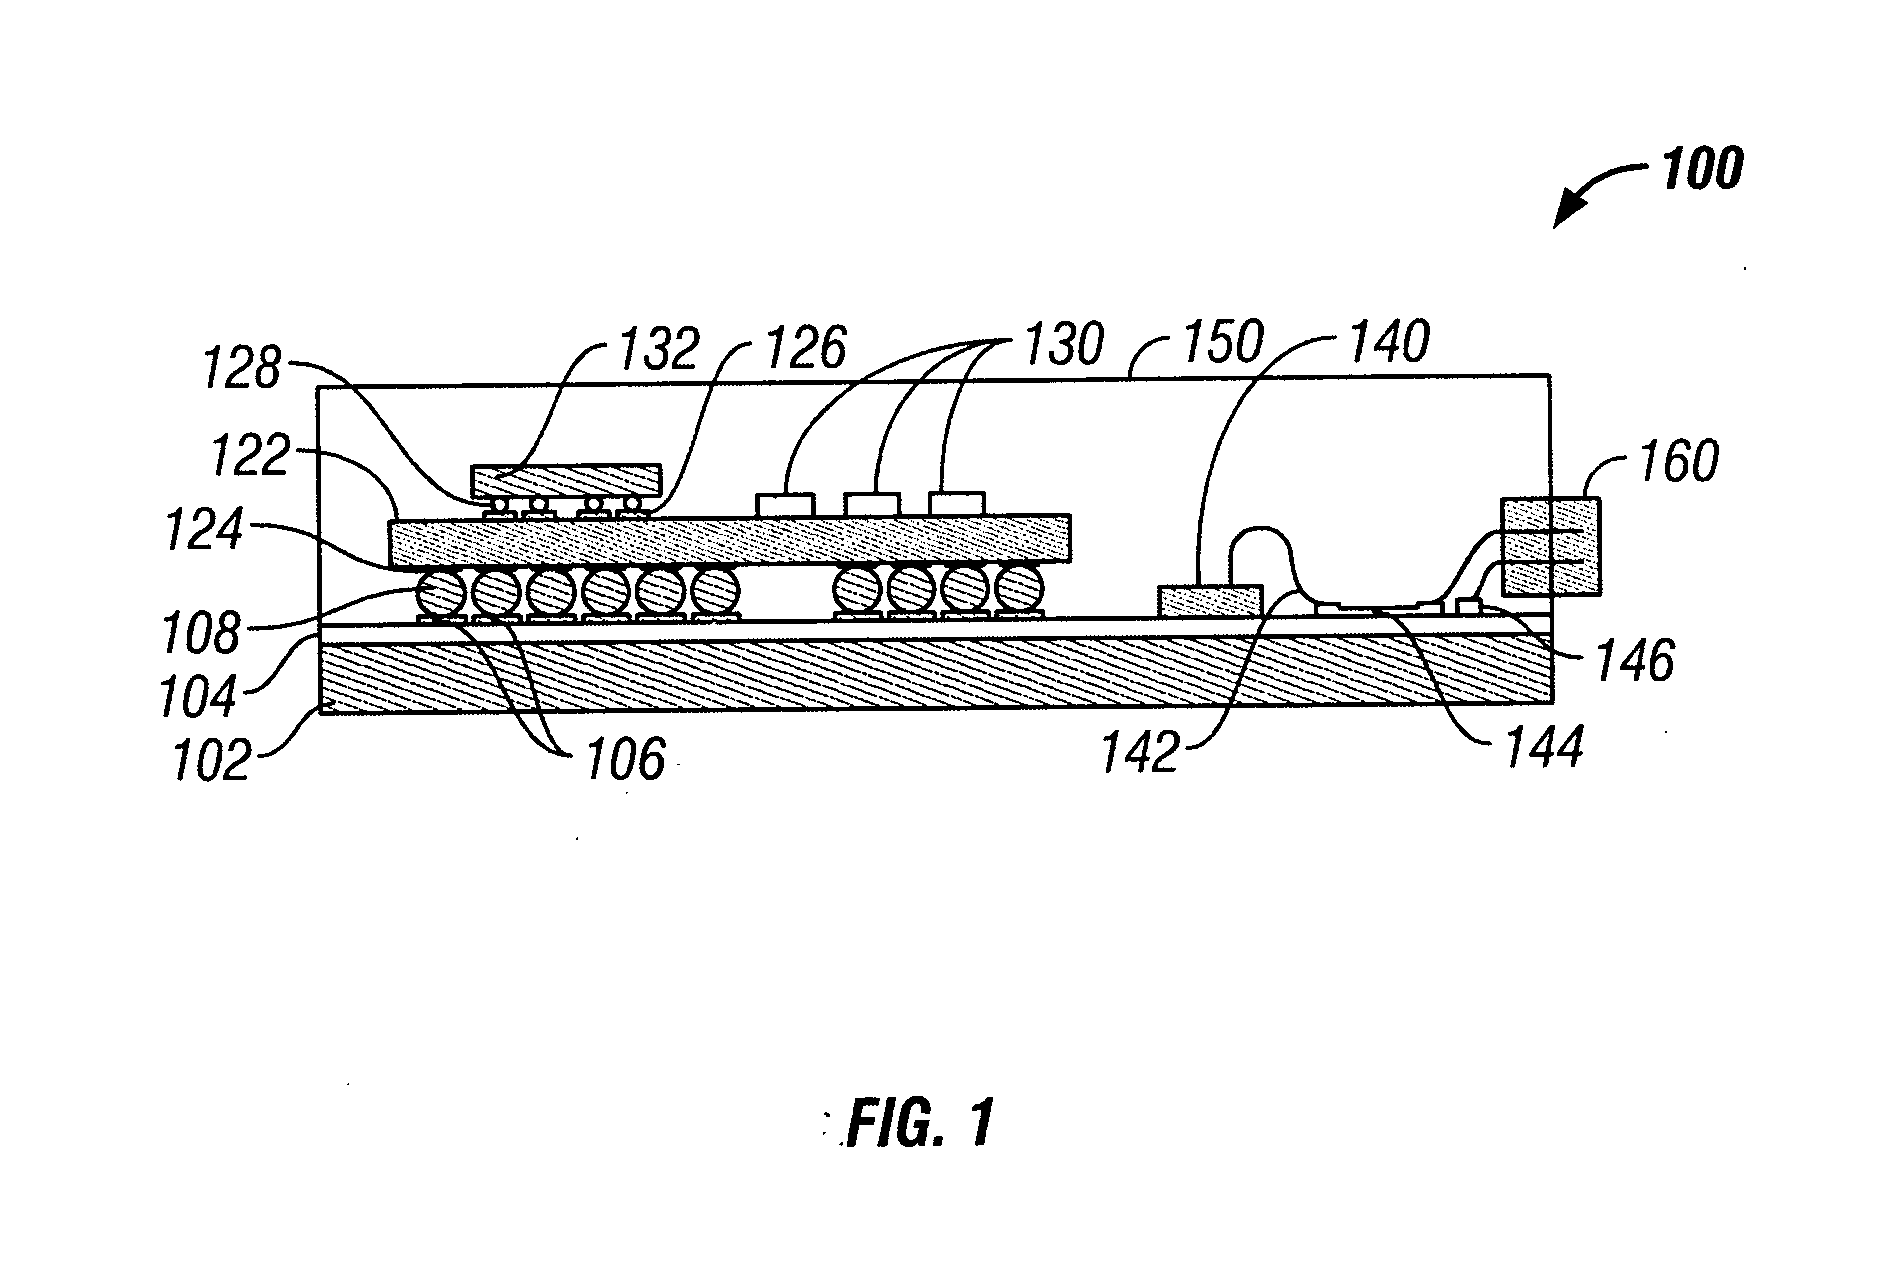 Electronic assembly including multiple substrates